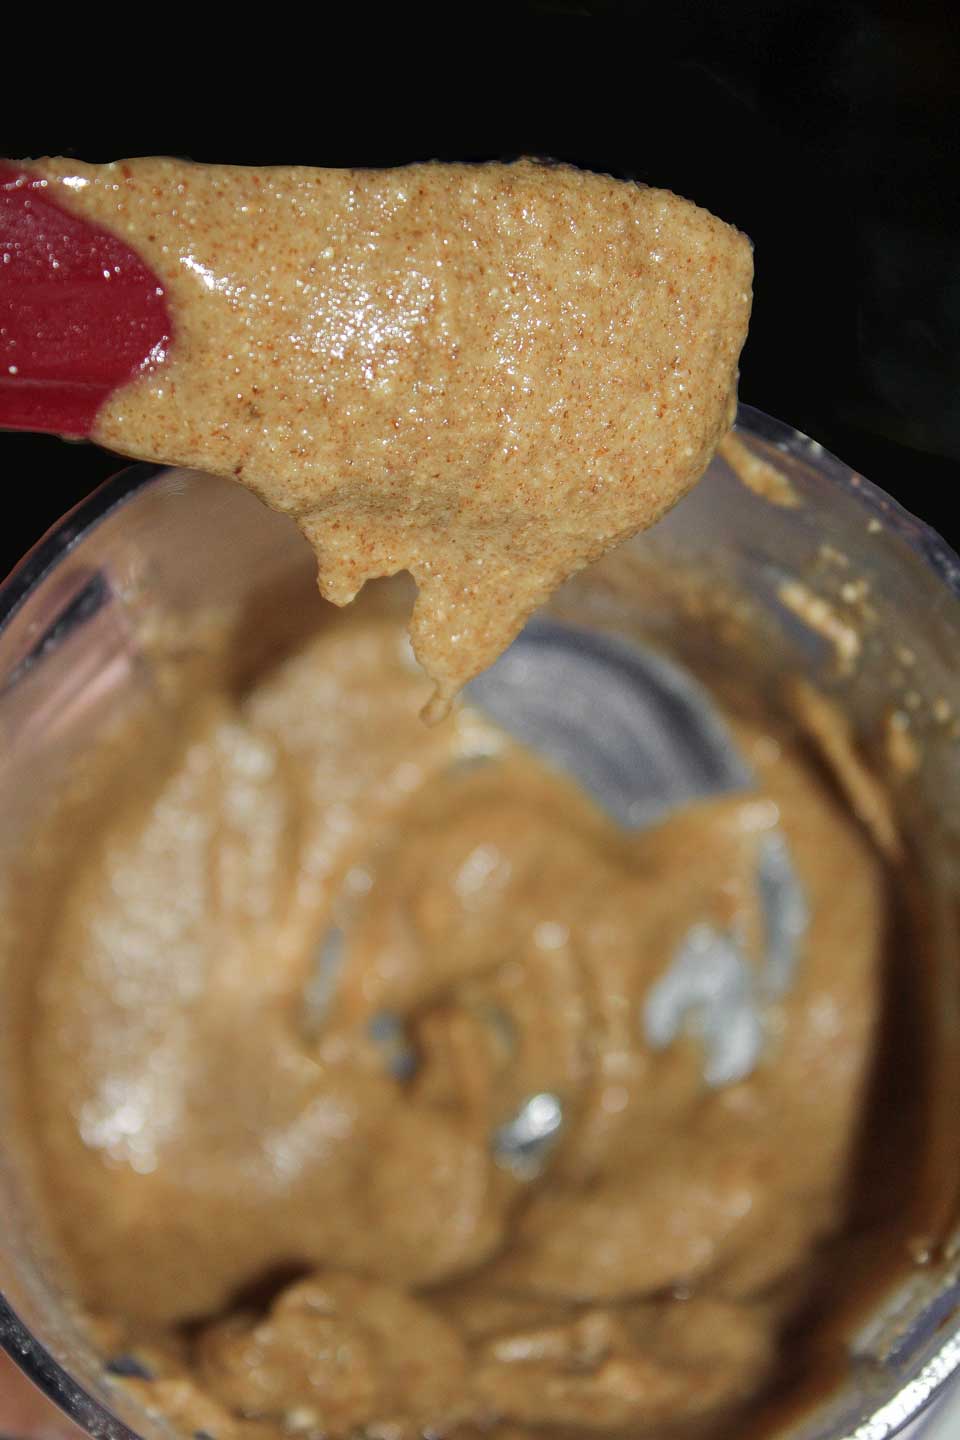 Closeup of a red scraper that's been dipped down into the bowl of processed pecan butter.